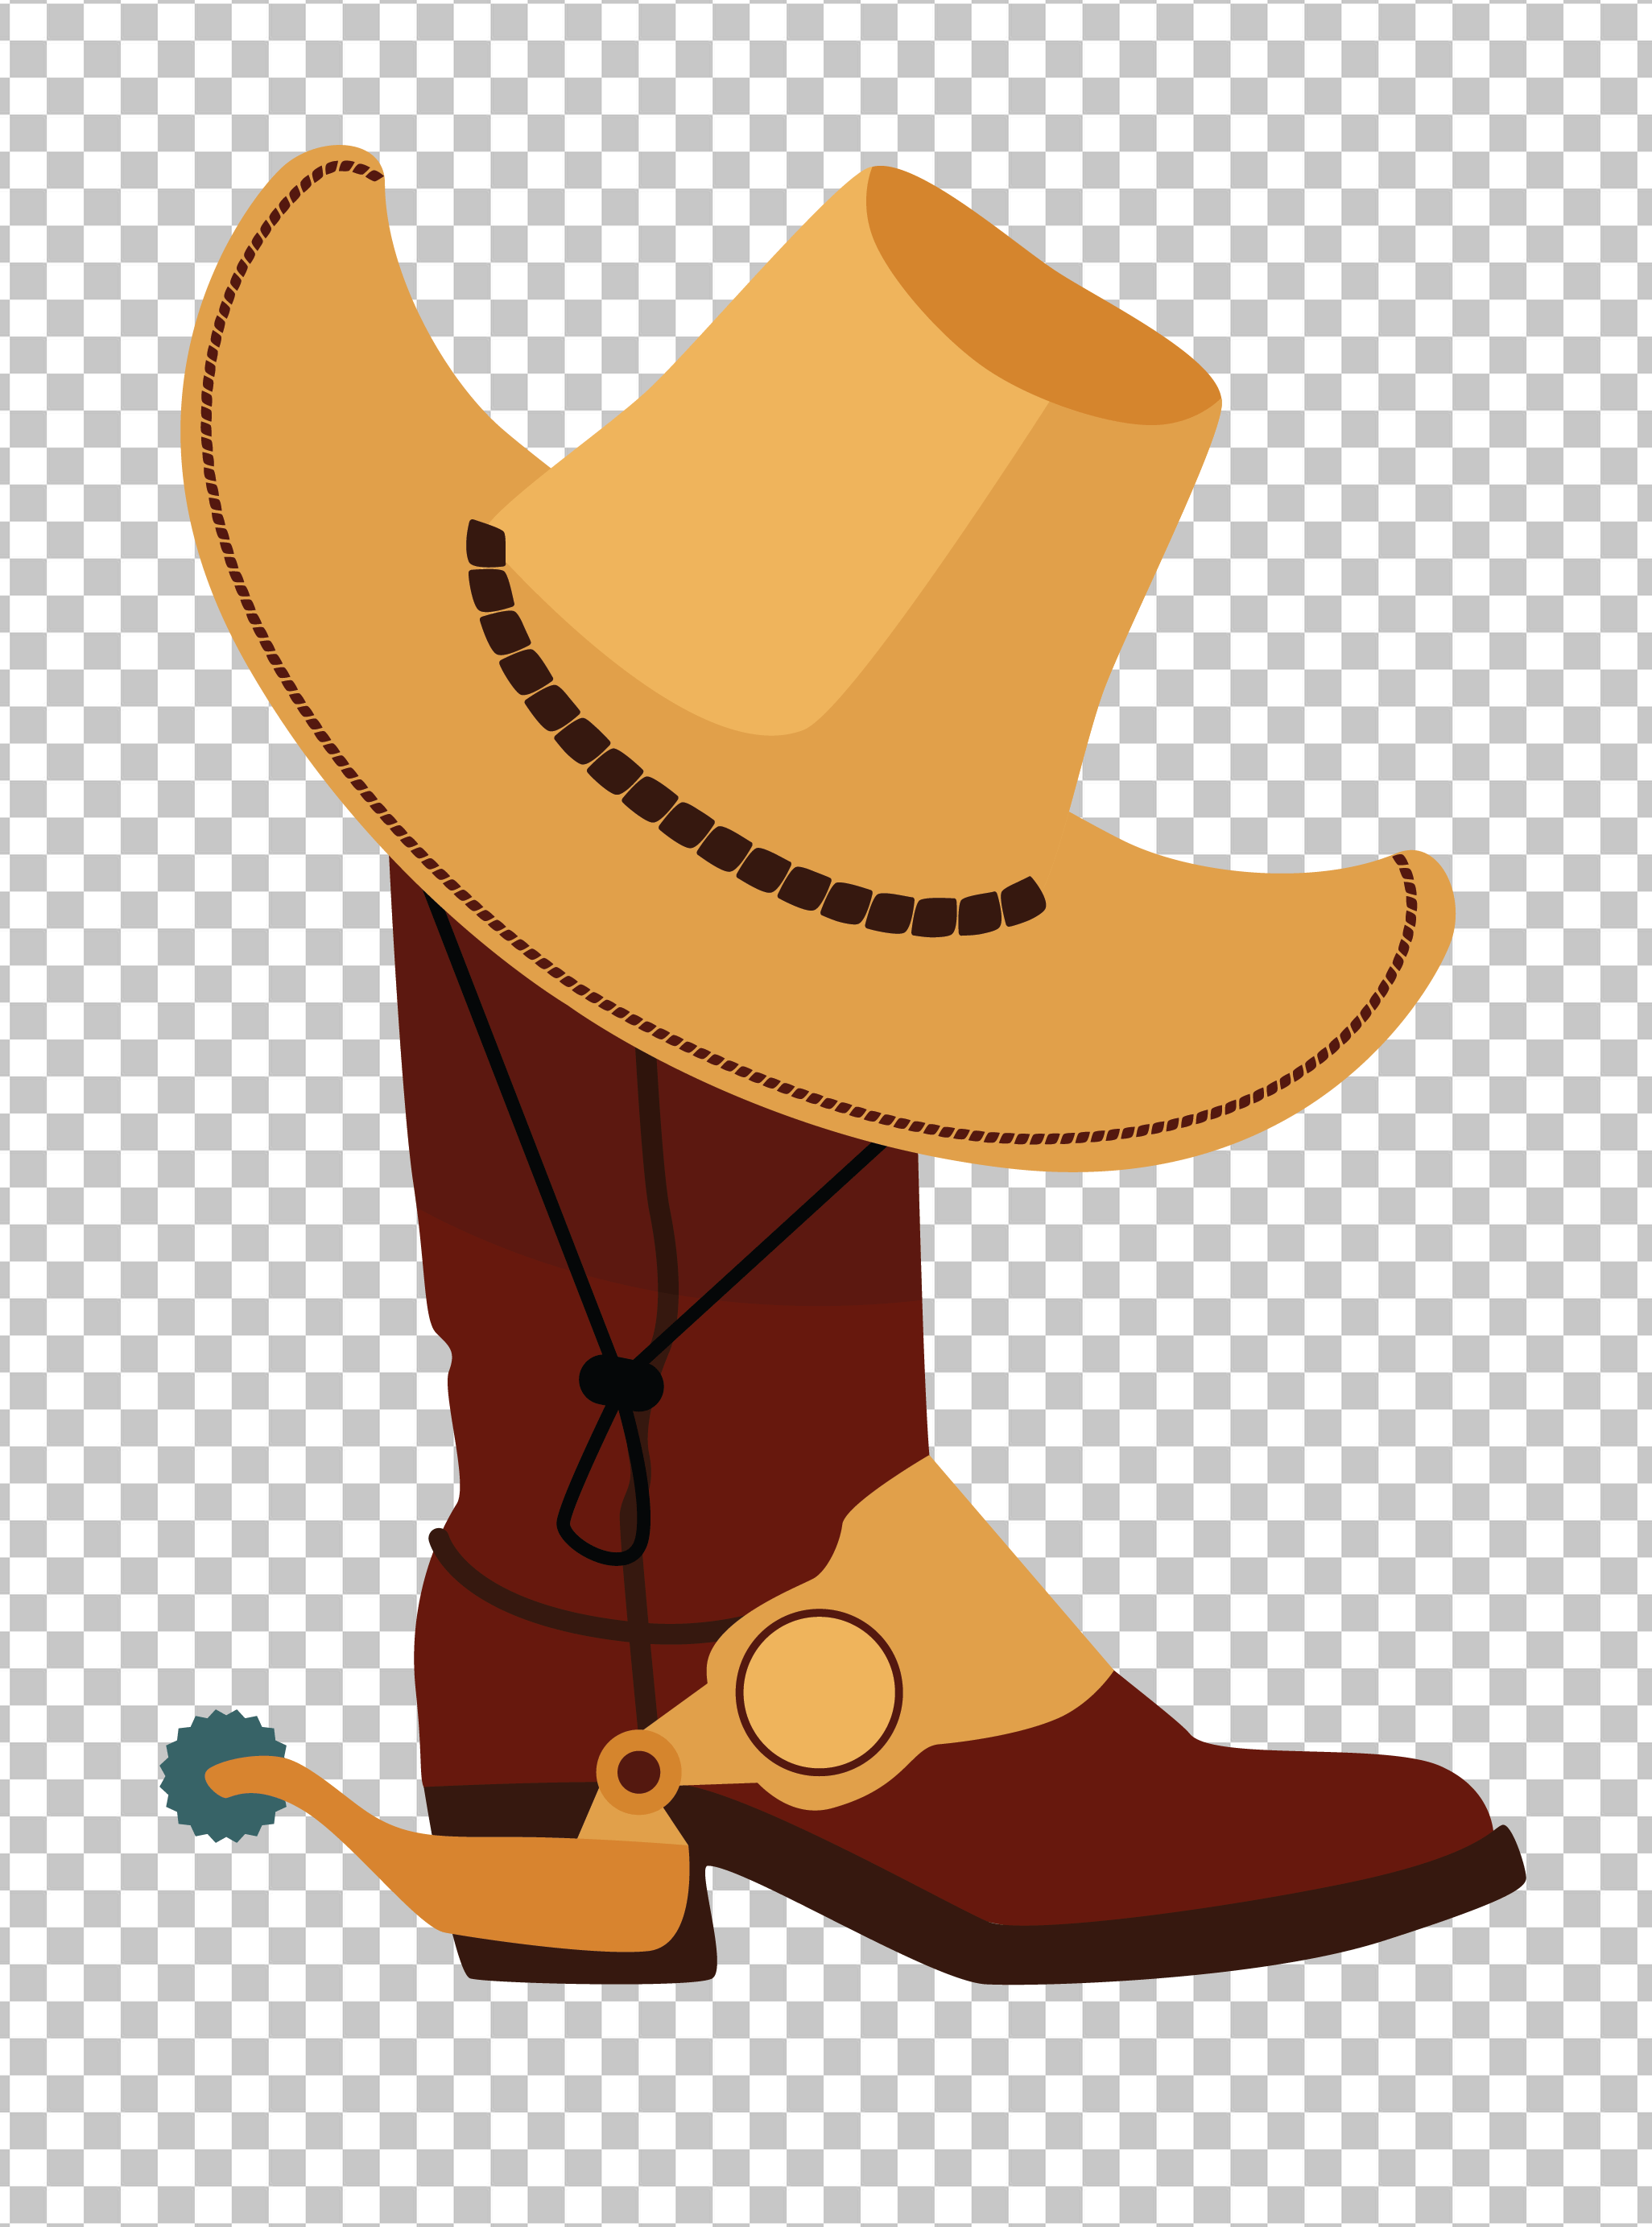 Cowboy Boots and Hat PNG Image